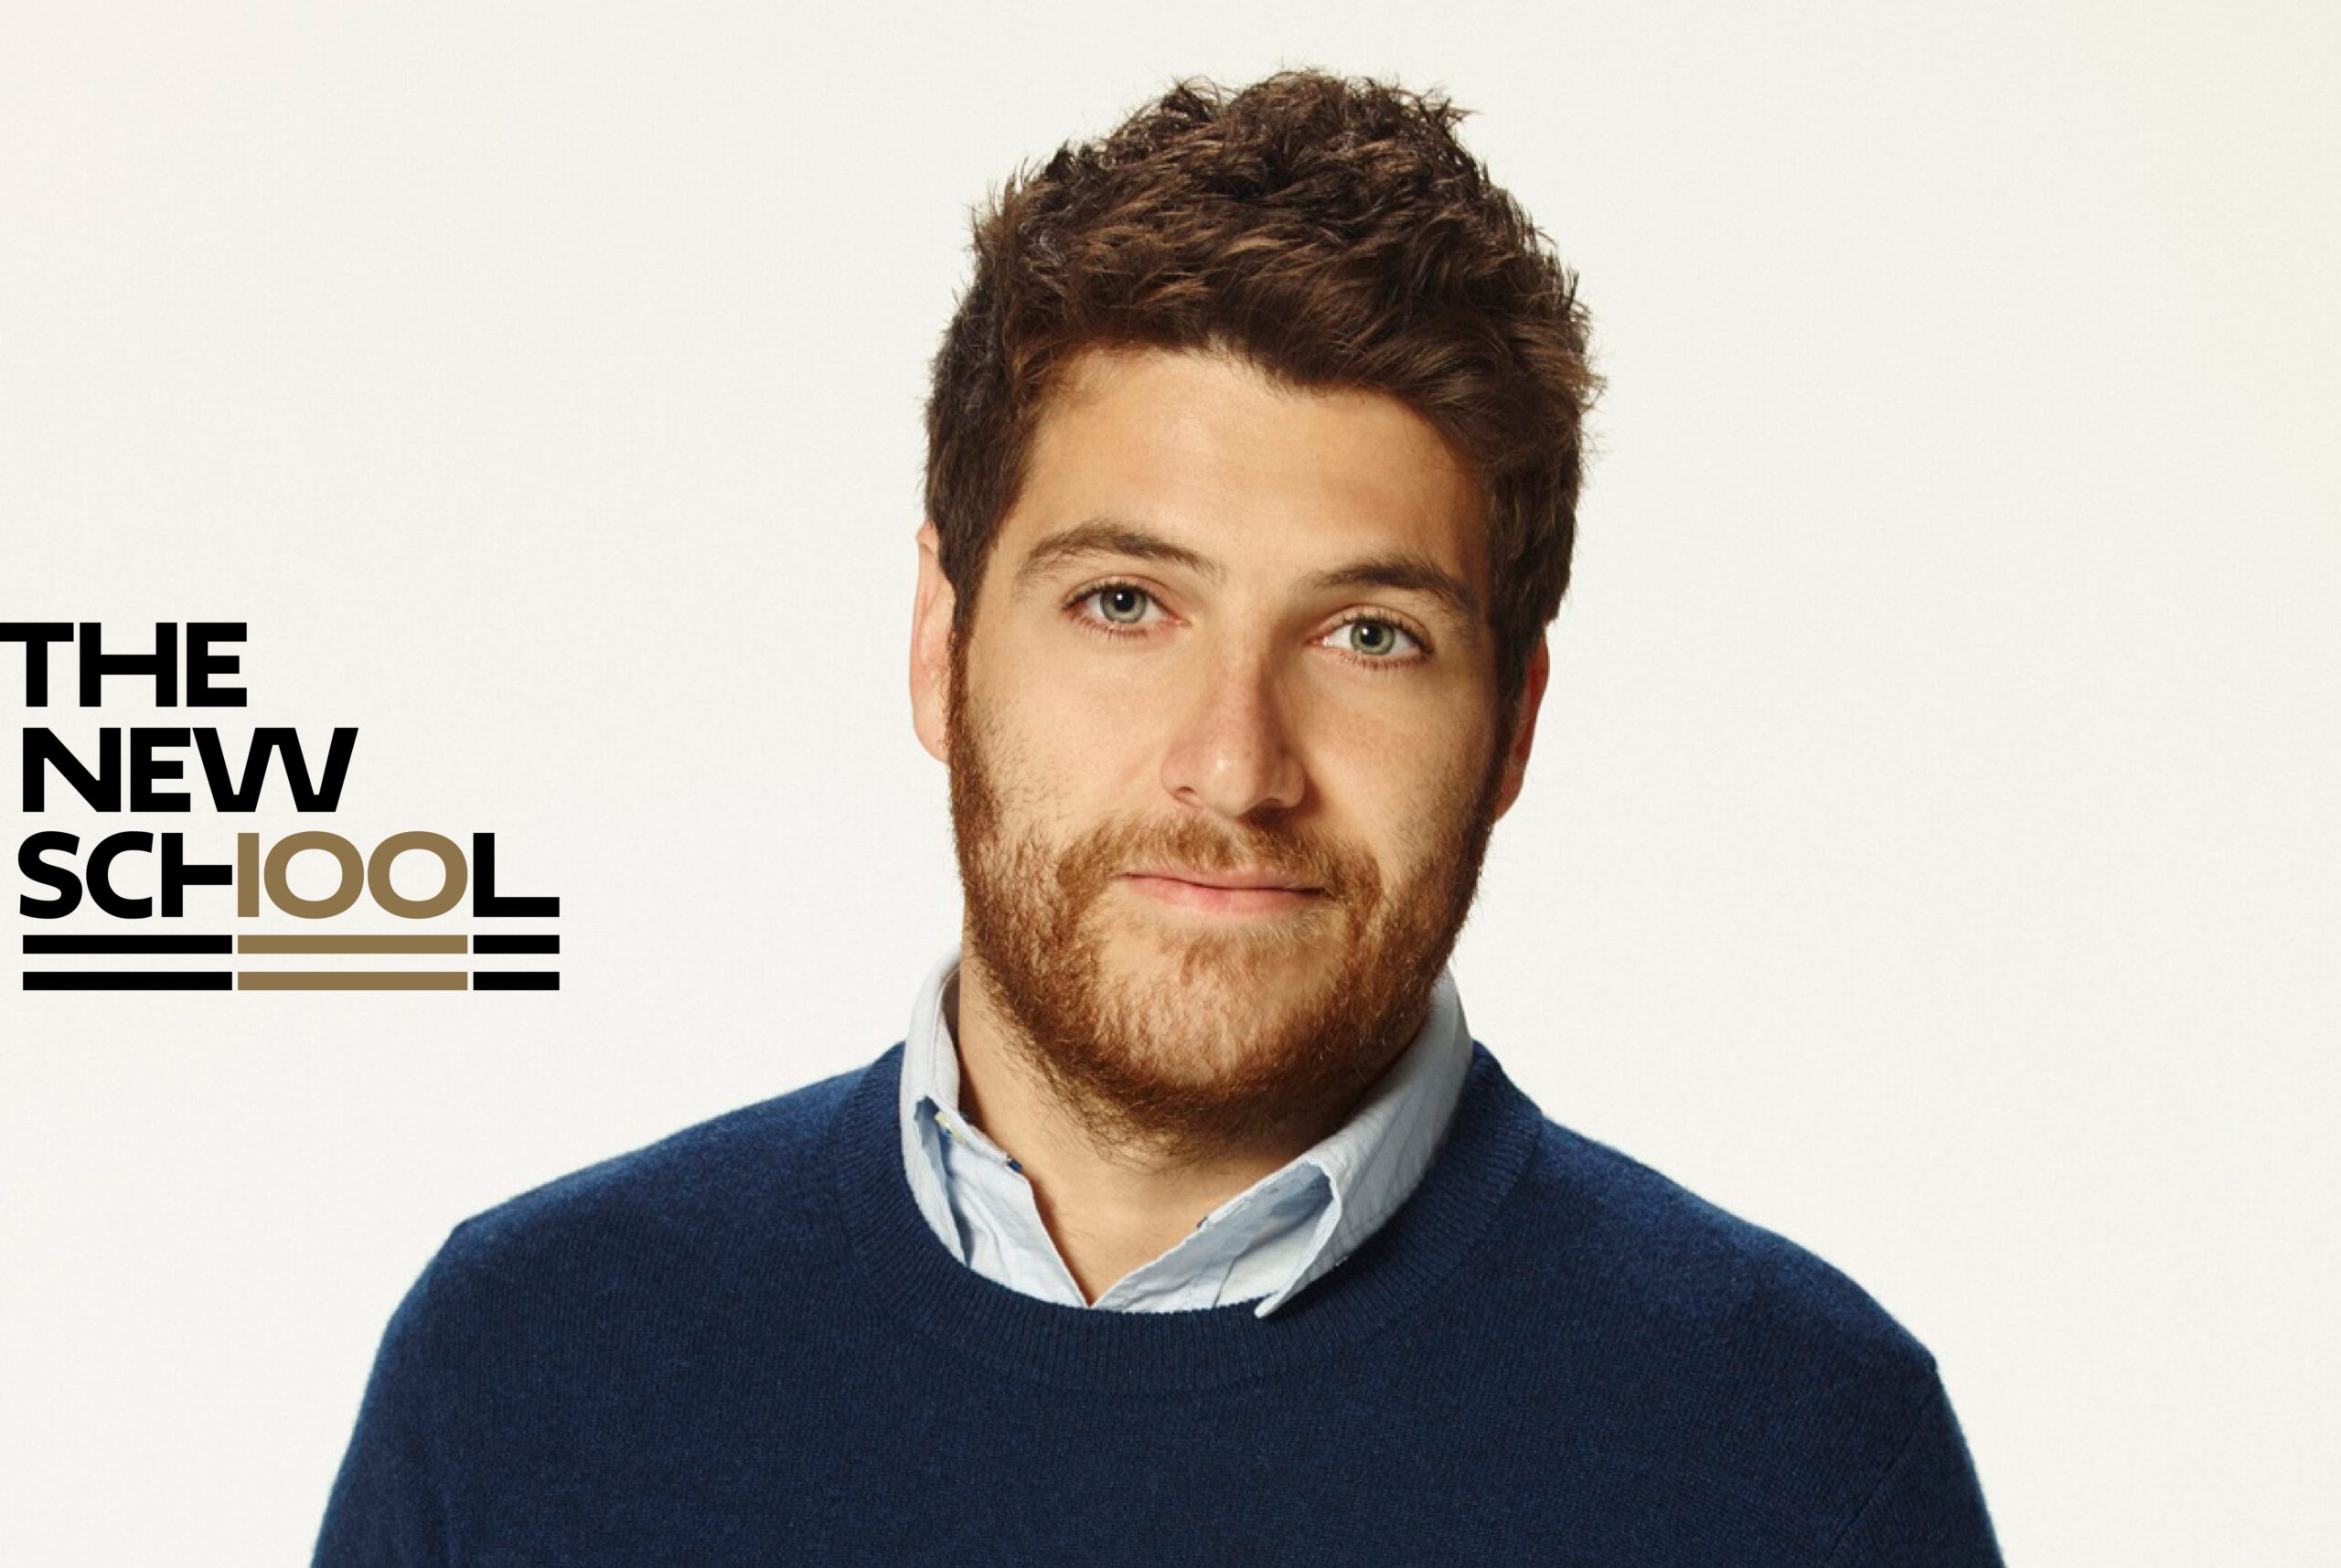 Adam Pally Biography: Age, Wife, Parents, Net Worth, Nationality, Children, Height, Wikipedia, Movies